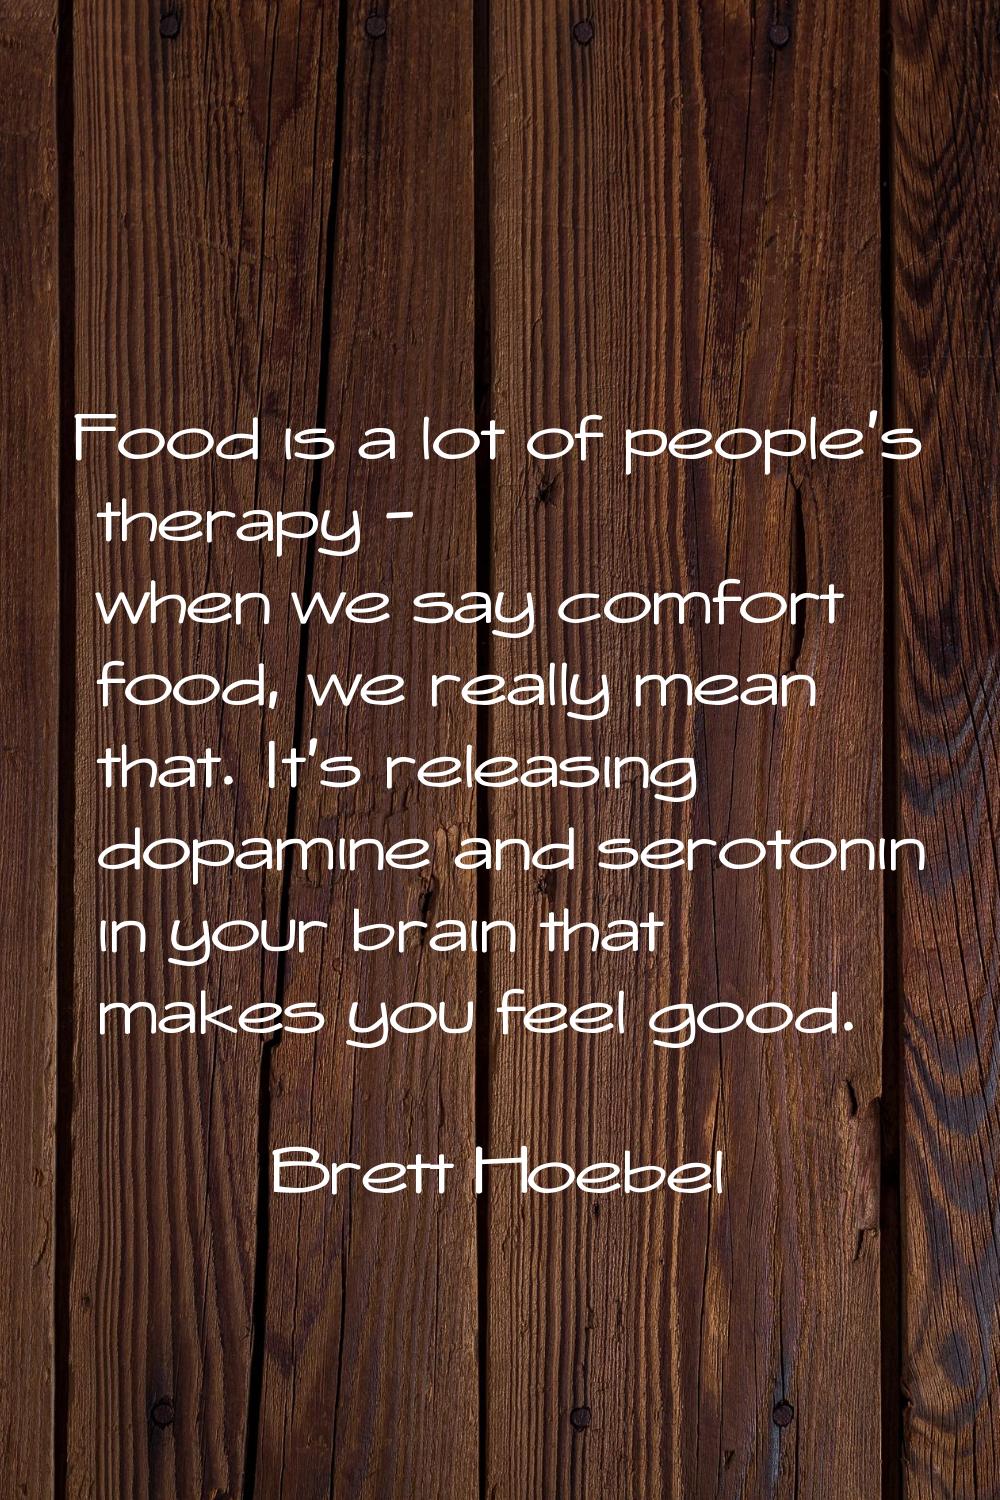 Food is a lot of people's therapy - when we say comfort food, we really mean that. It's releasing d